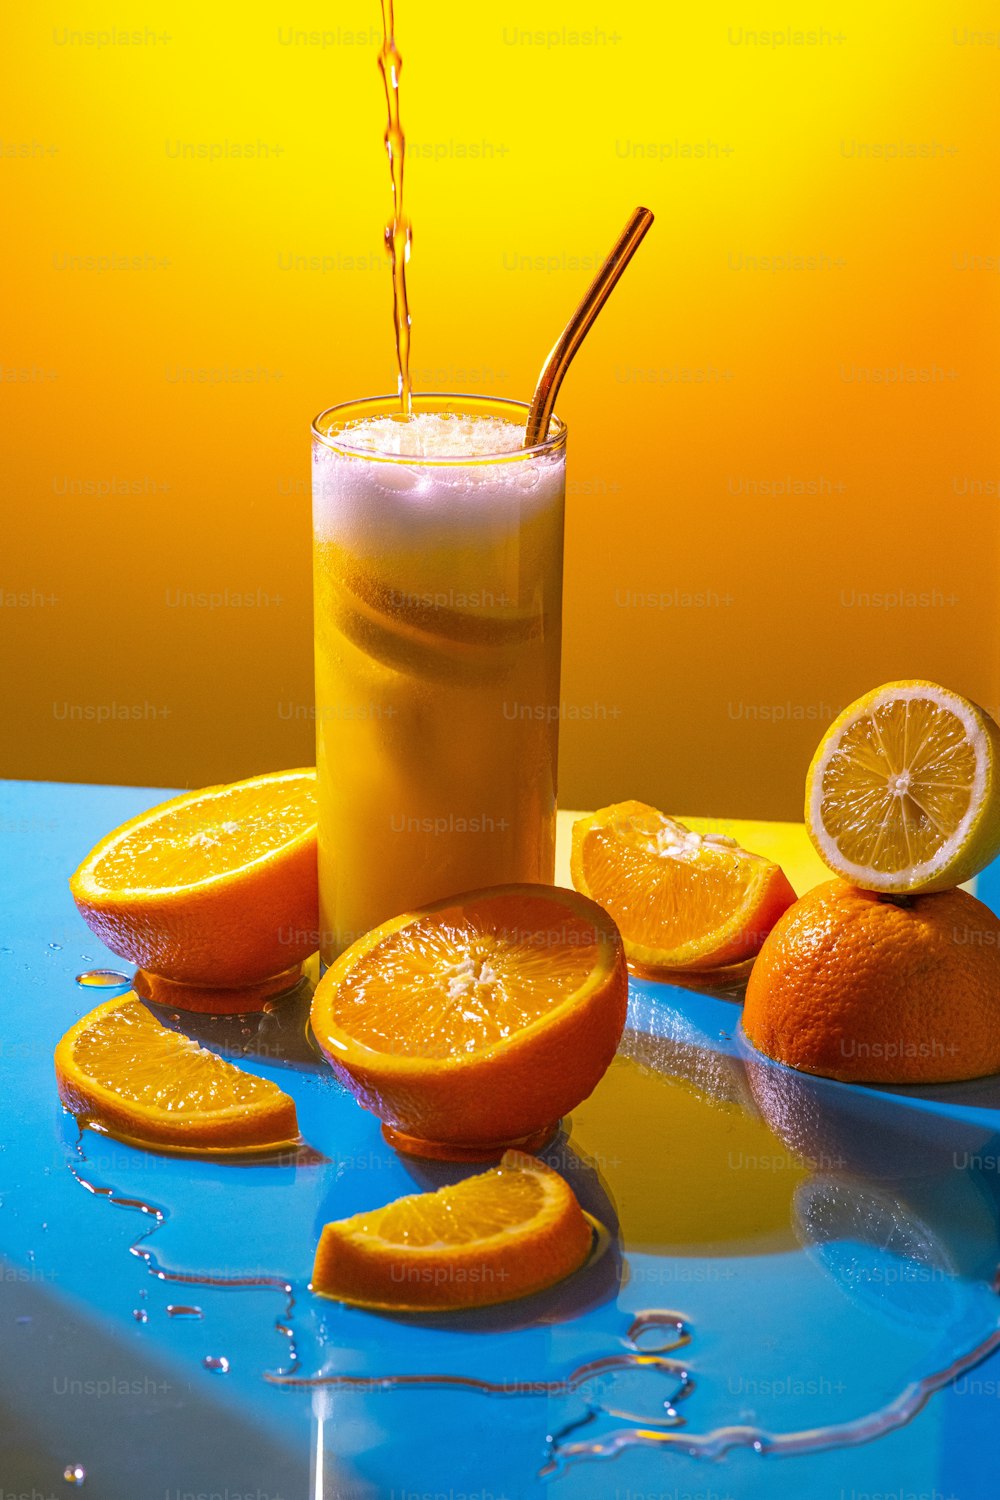 a glass of orange juice on a table with sliced oranges